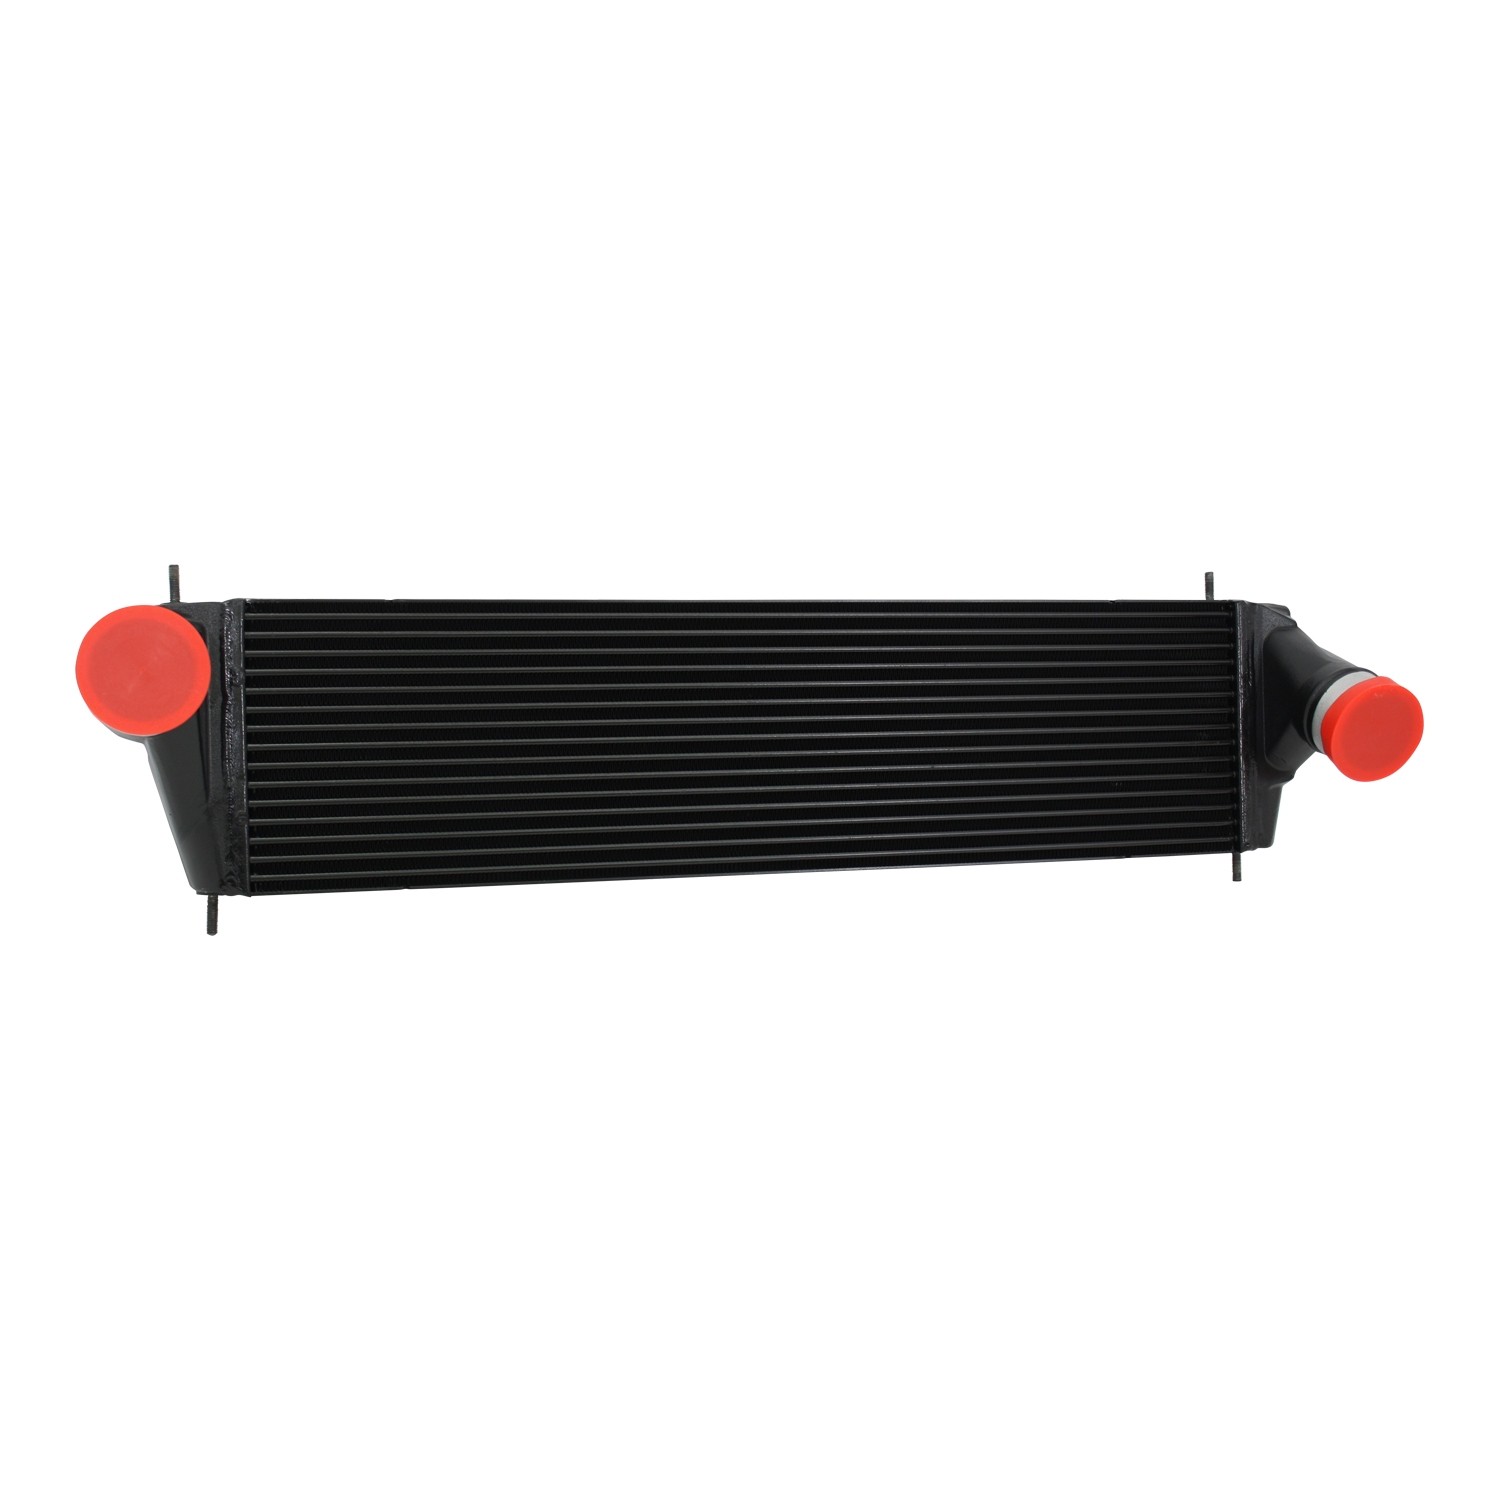 2014 And Newer Durastar International Charge Air Cooler.